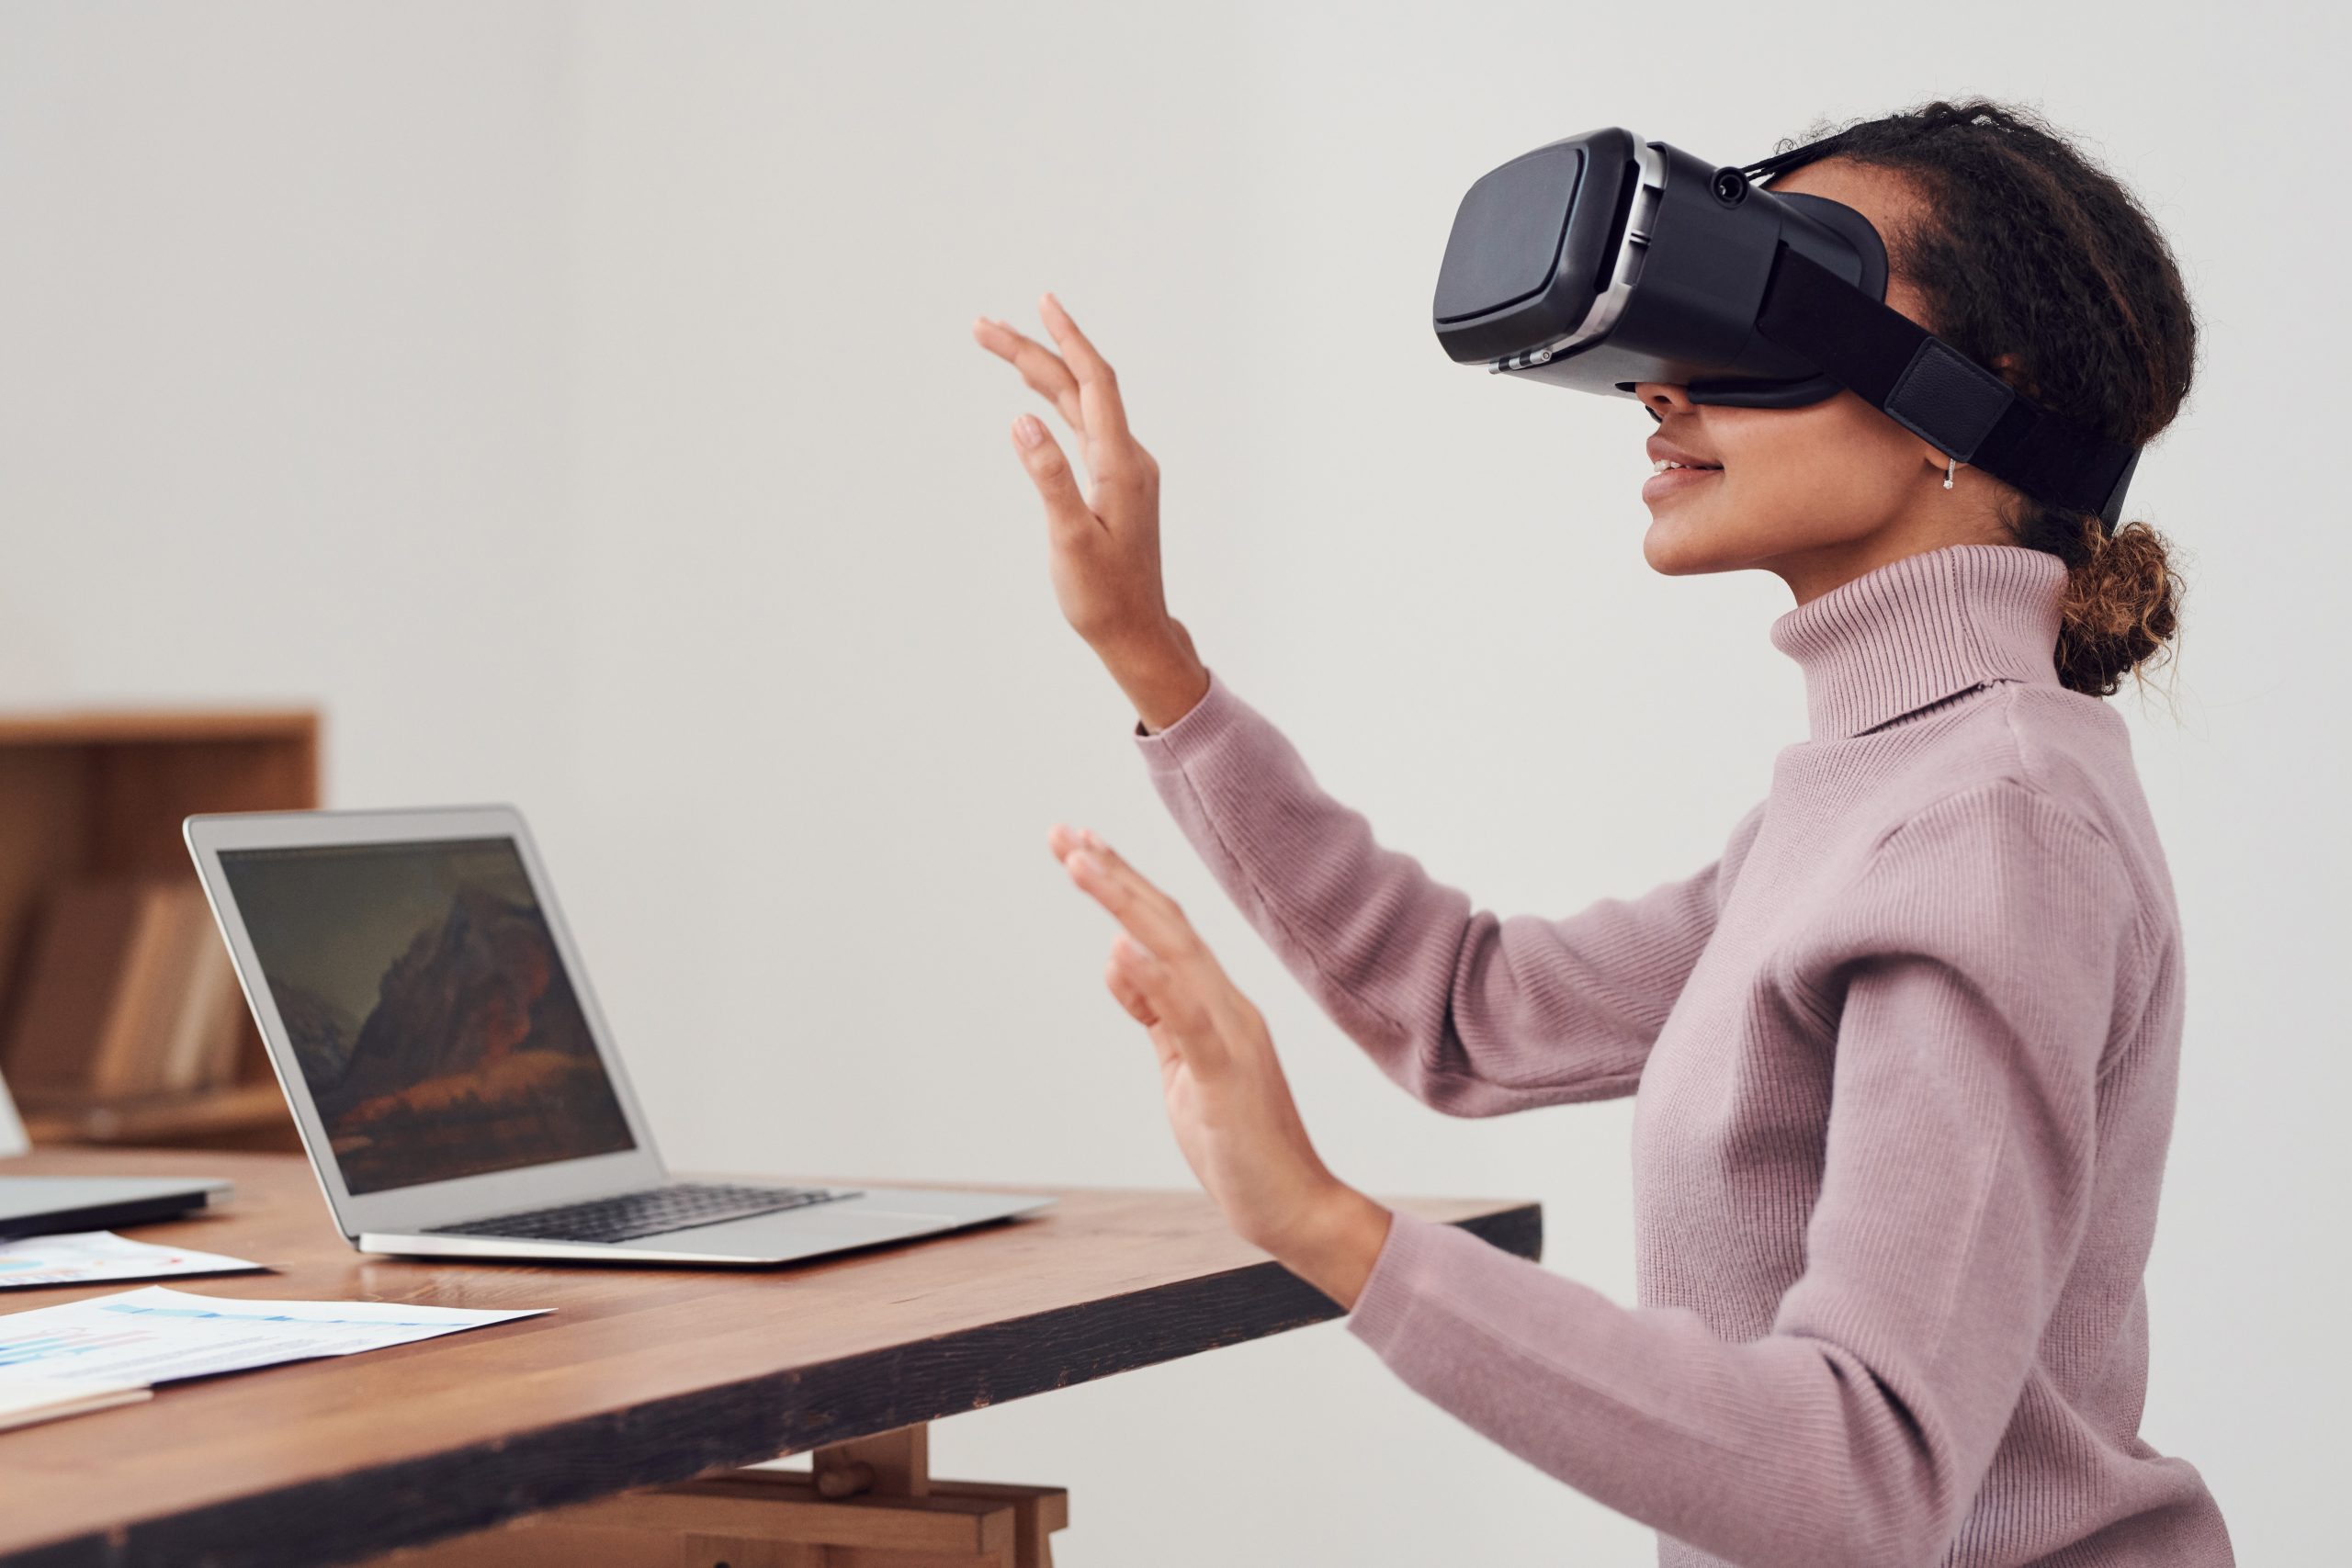 Understanding Augmented Reality (AR) and Virtual Reality (VR)